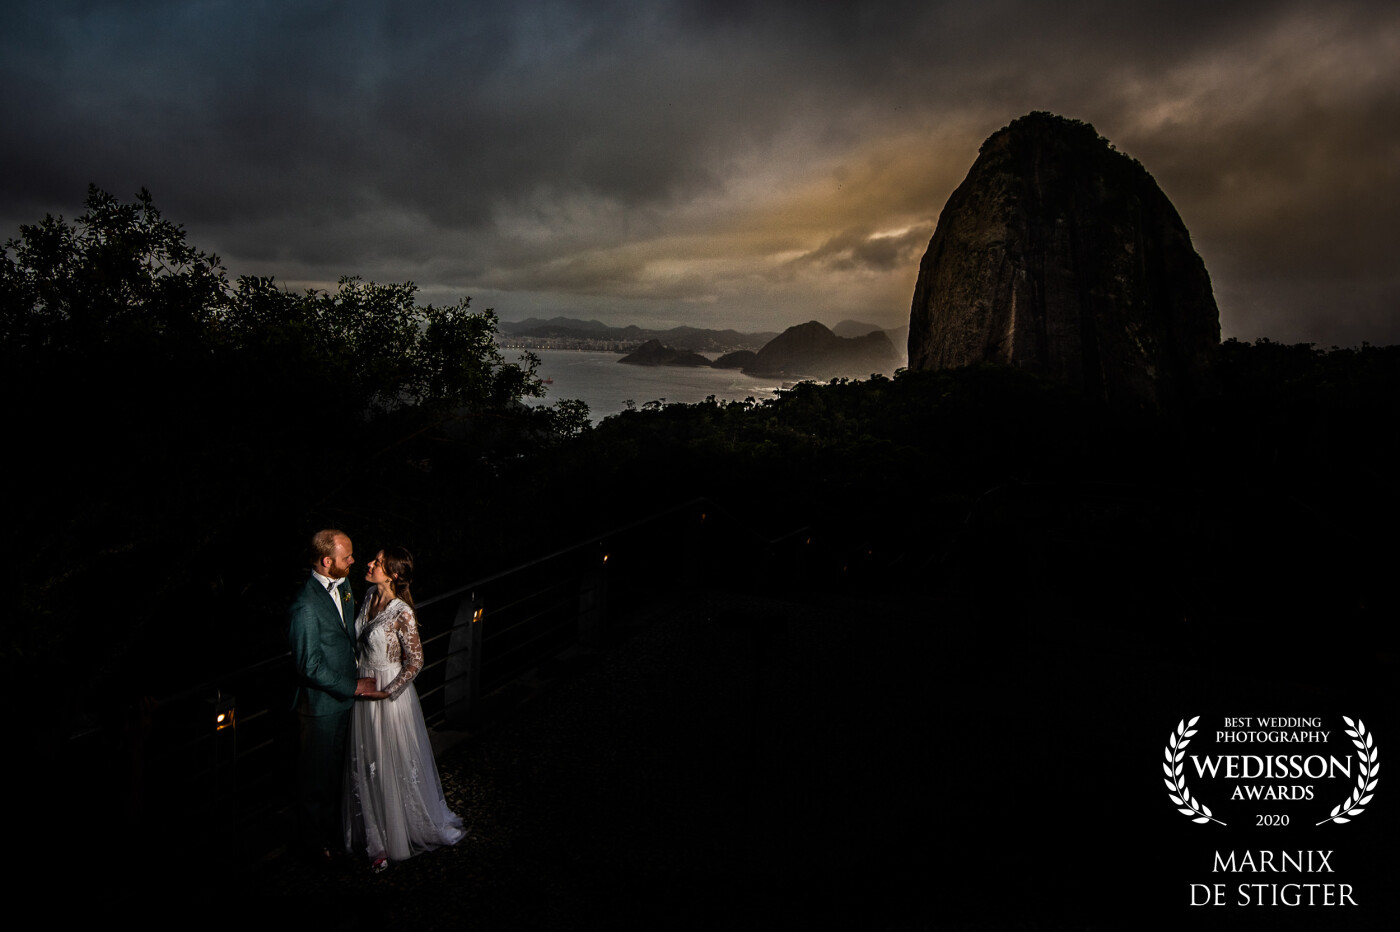 This awesome destination wedding allowed for some extra time for after wedding shoots. With the sun setting in this beautiful place, the backdrop created the perfect image for a posed shot.